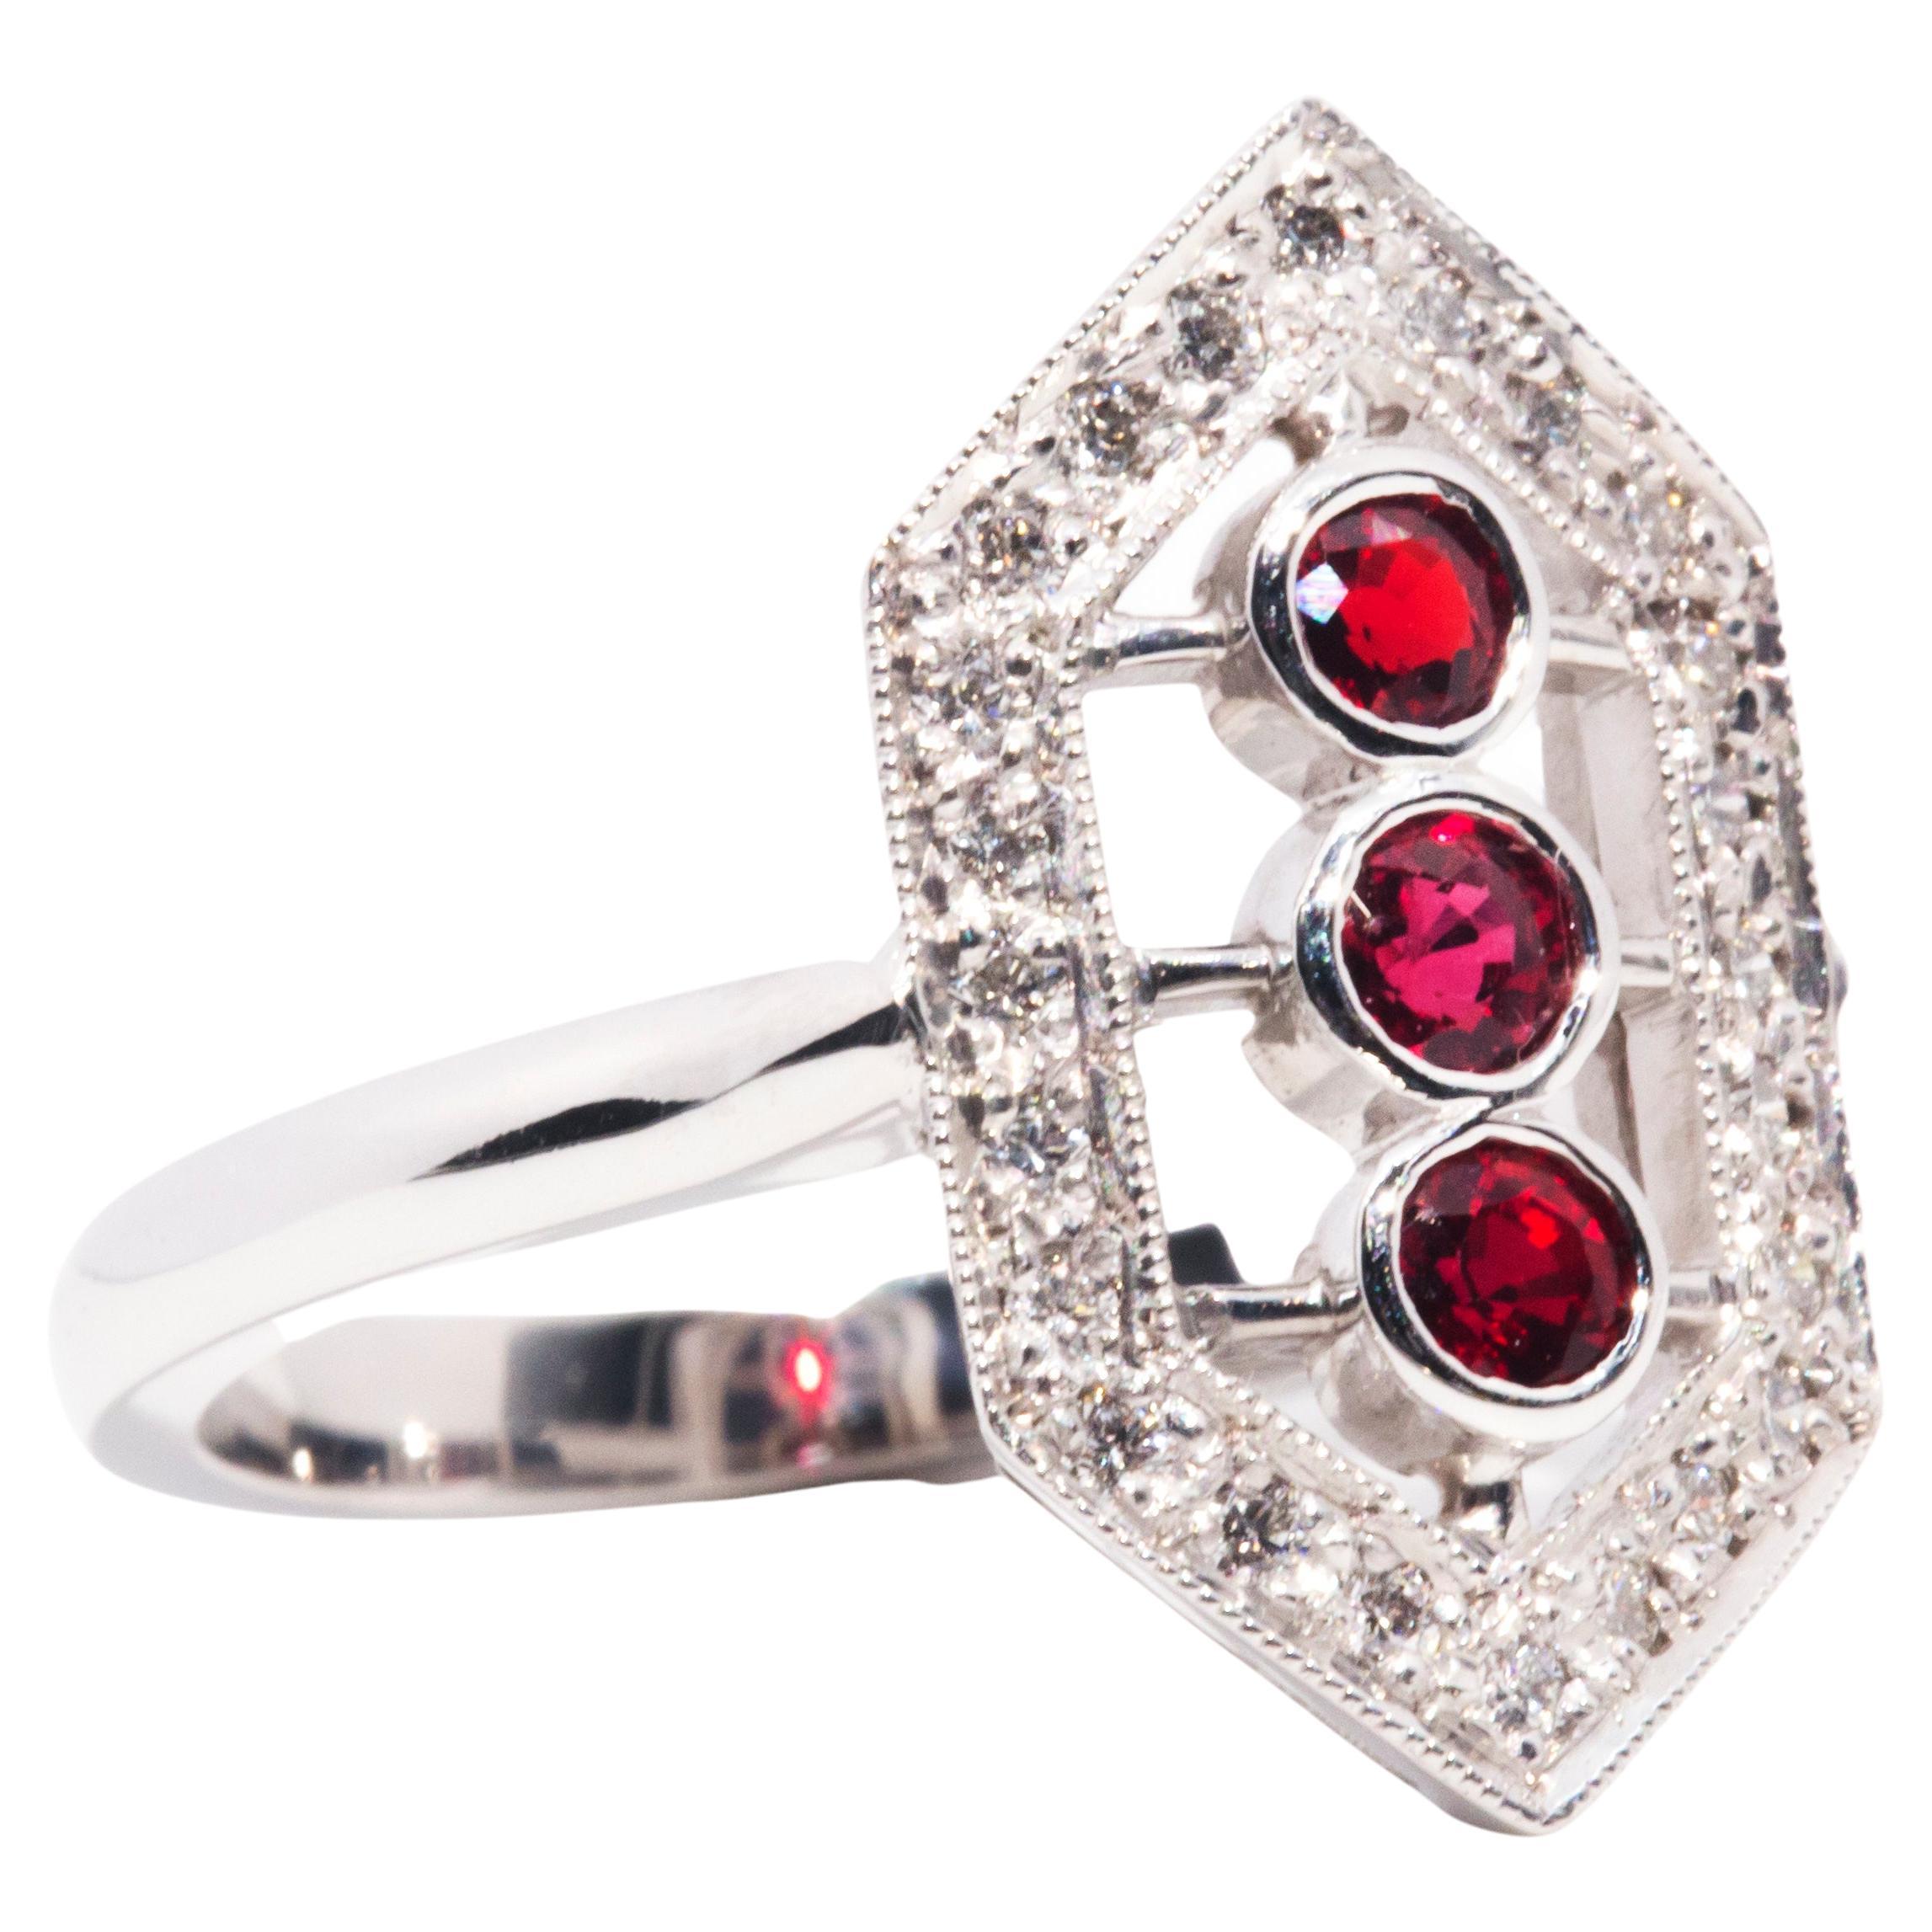 This gorgeous Art Deco inspired ring is forged in 18 carat white gold and features a breathtaking elongated hexagonal cluster embellished with an opulent border of sparkling round brilliant cut diamonds and three alluring bright red natural red